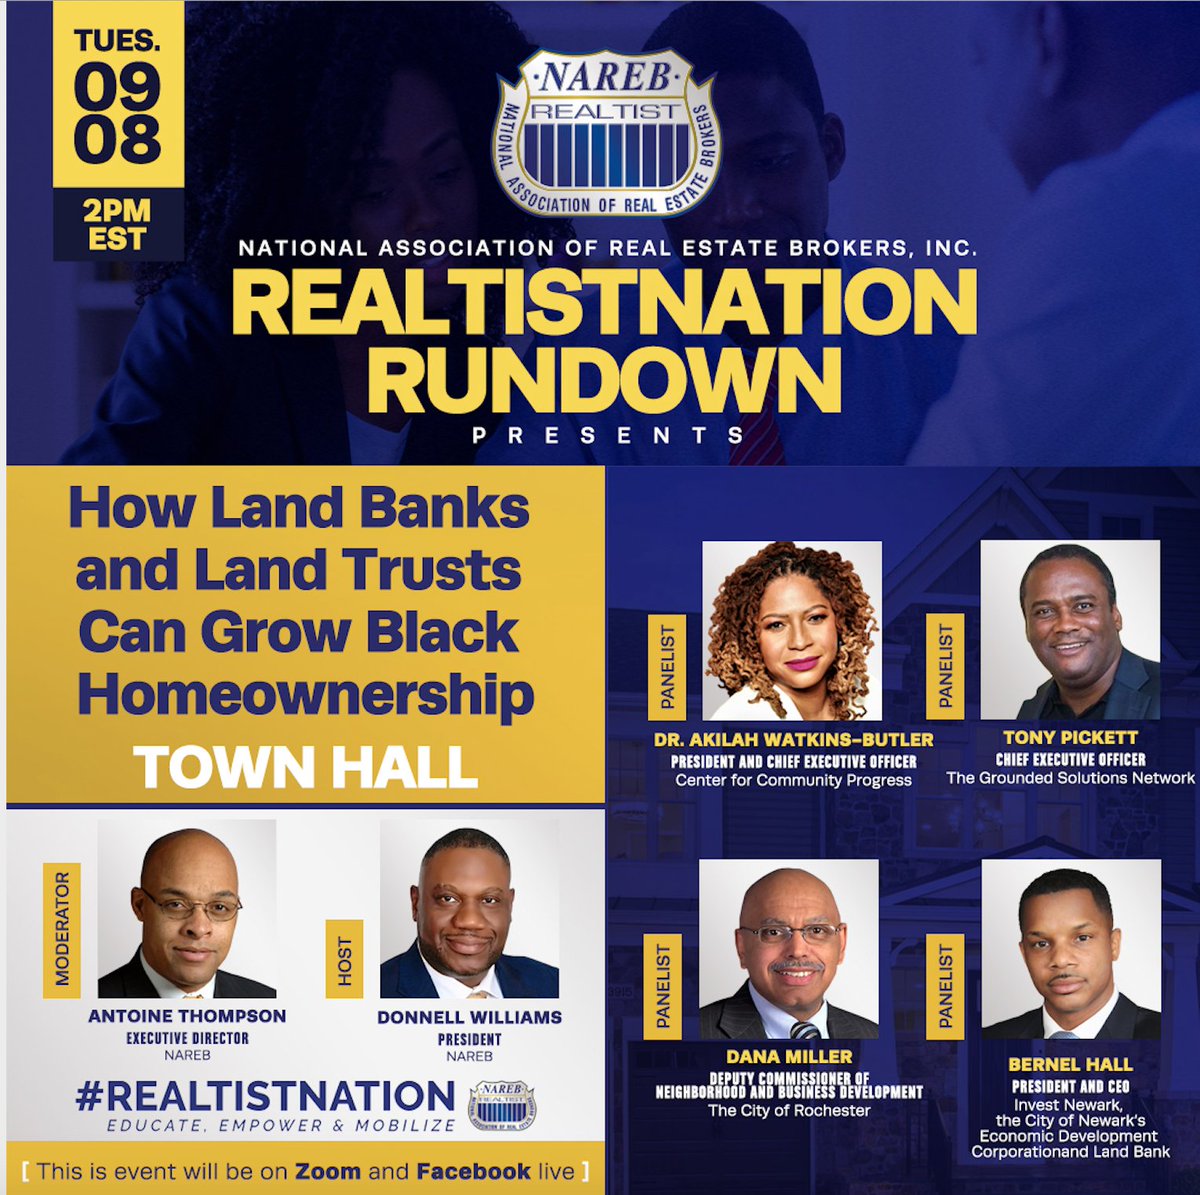 Join me today talking about how #landbanks and #communitylandtrusts Can Grow Black Homeownership.
@CProgressNews 
@Tonypmc 
@GroundedNetwork 
@NAREBDenver